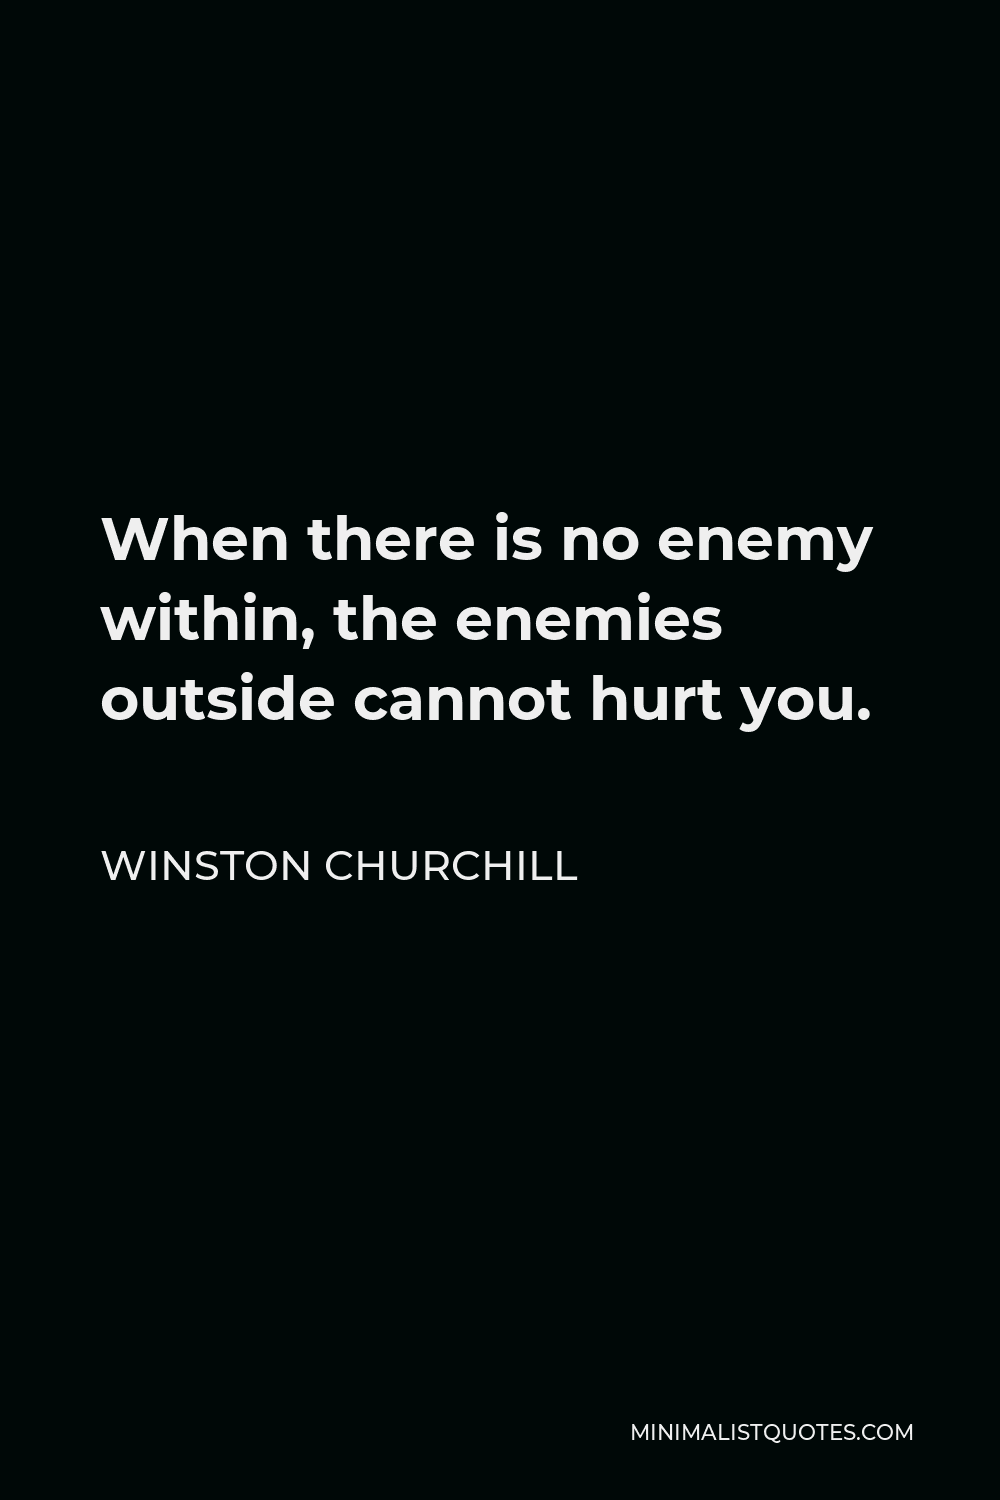 Winston Churchill Quote When There Is No Enemy Within The Enemies Outside Cannot Hurt You